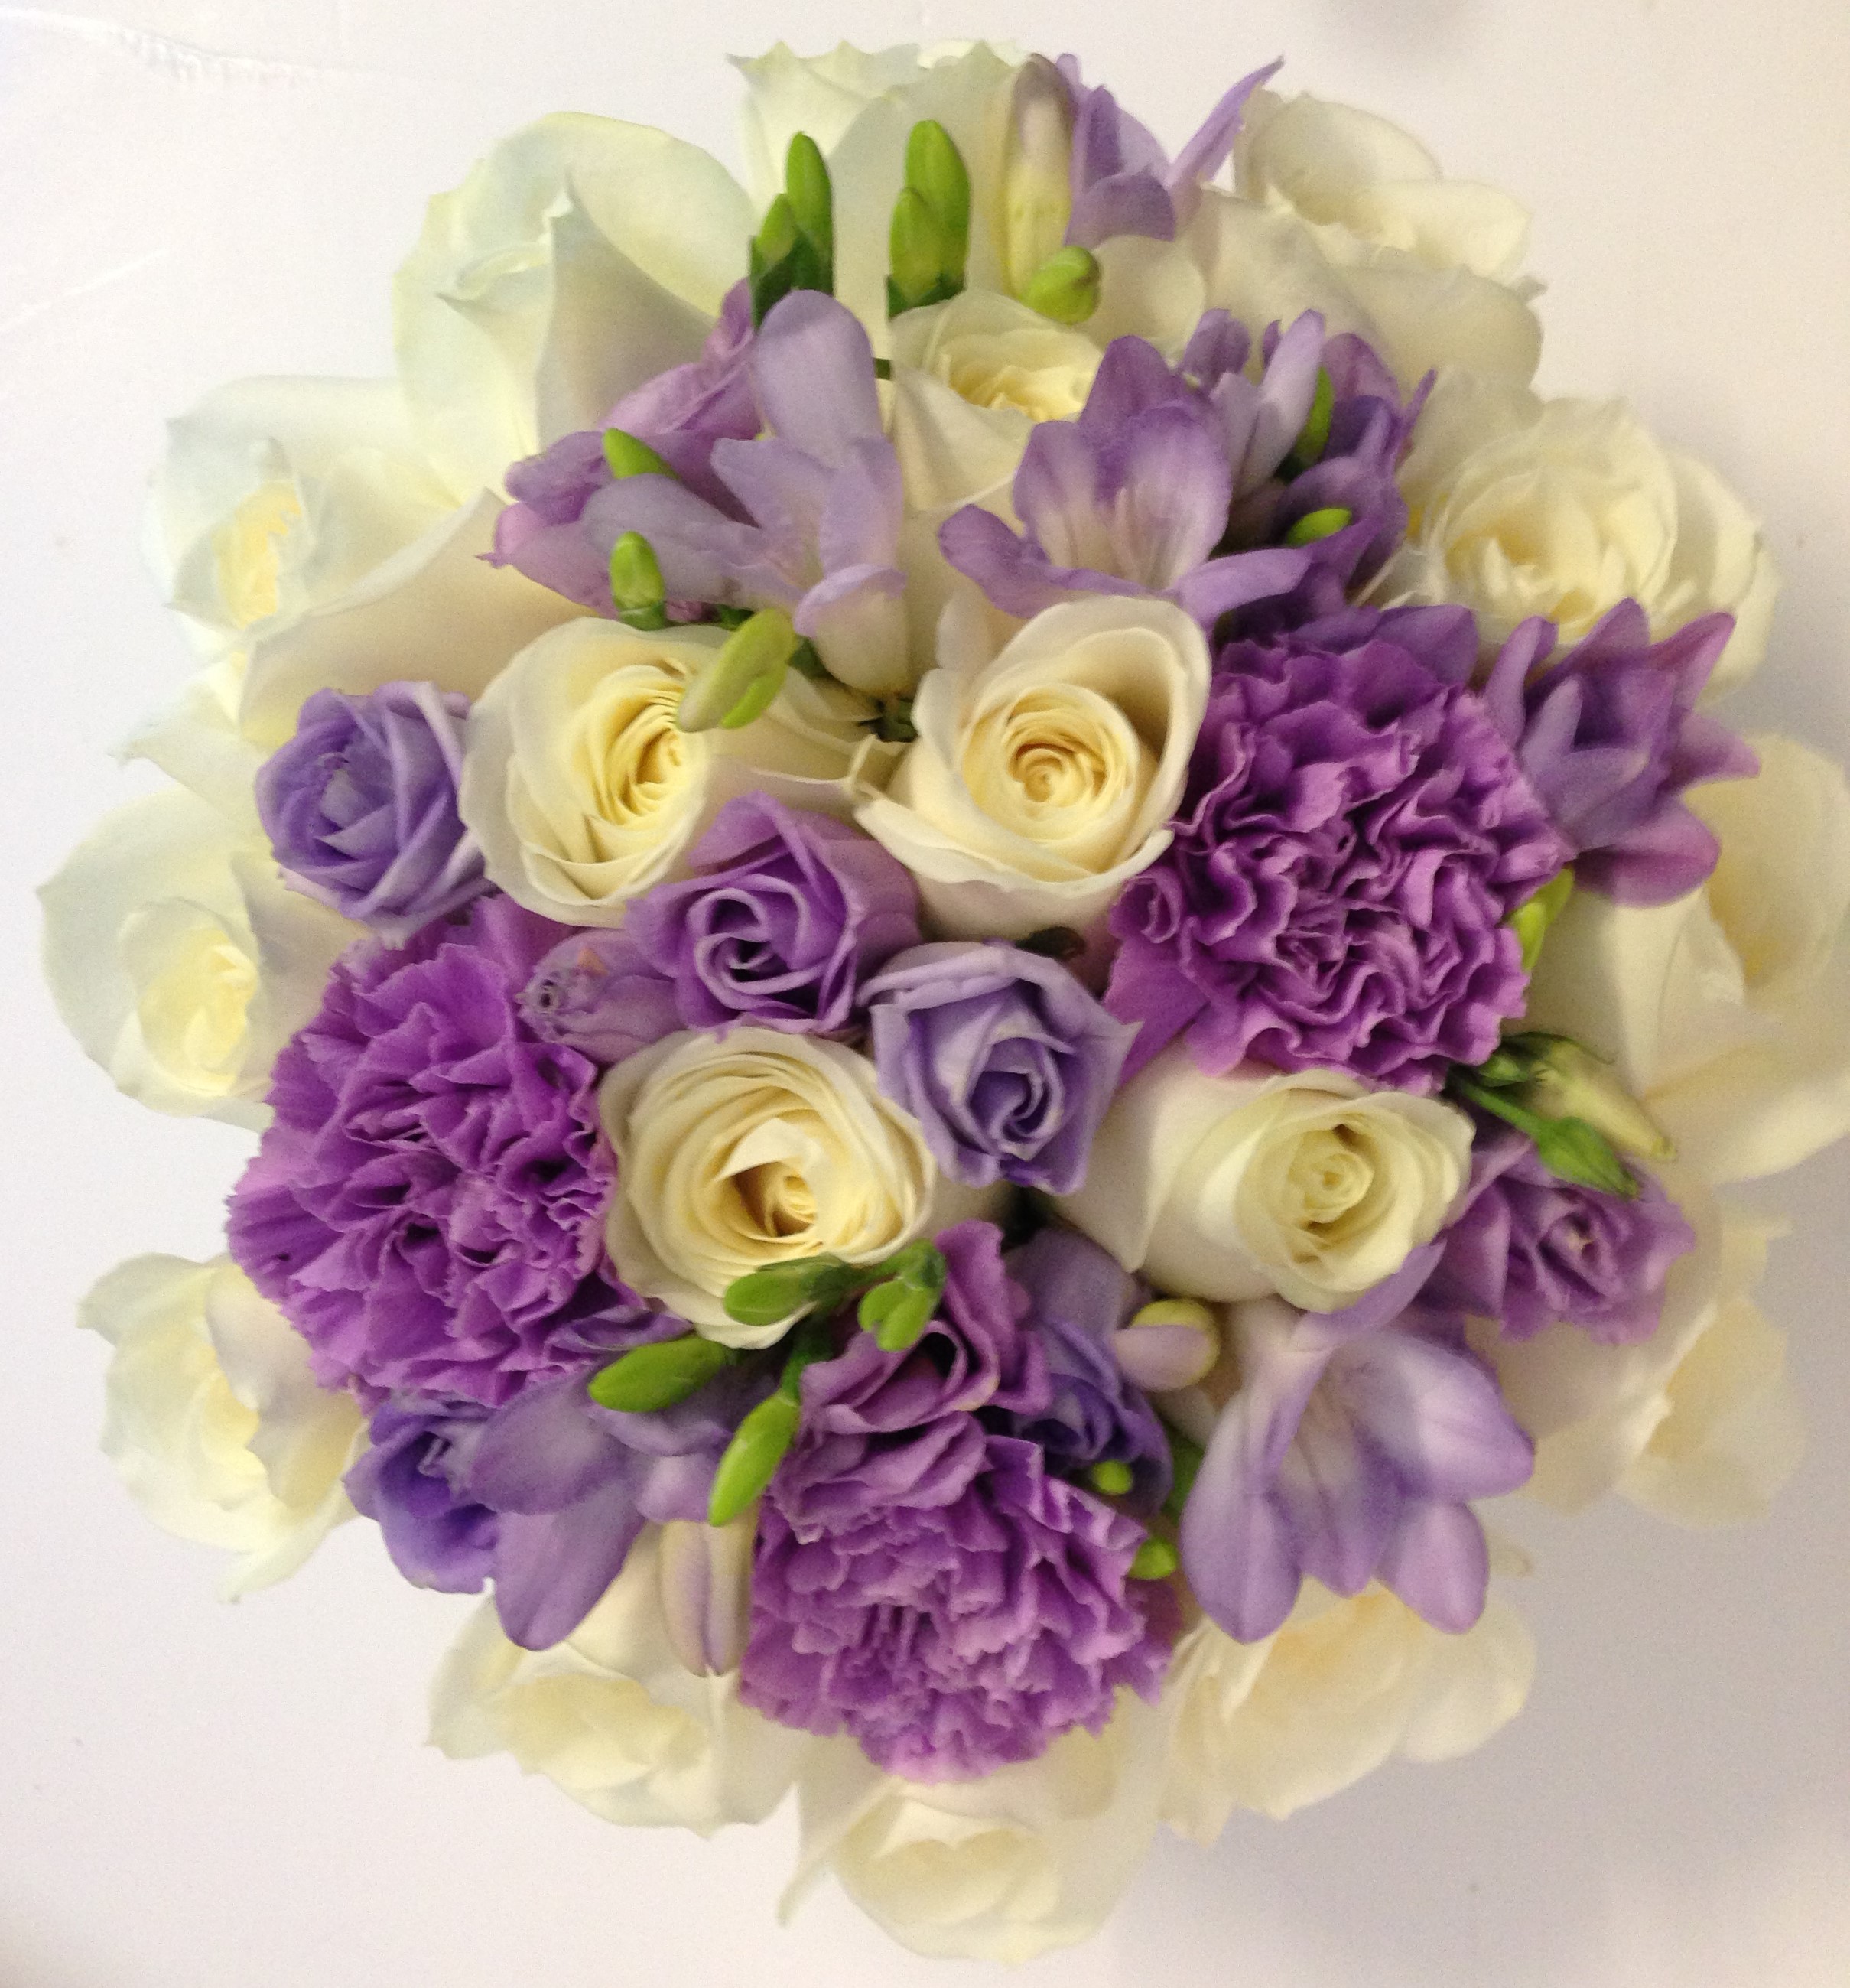 lilacs carnations freesia roses stunning bouquet